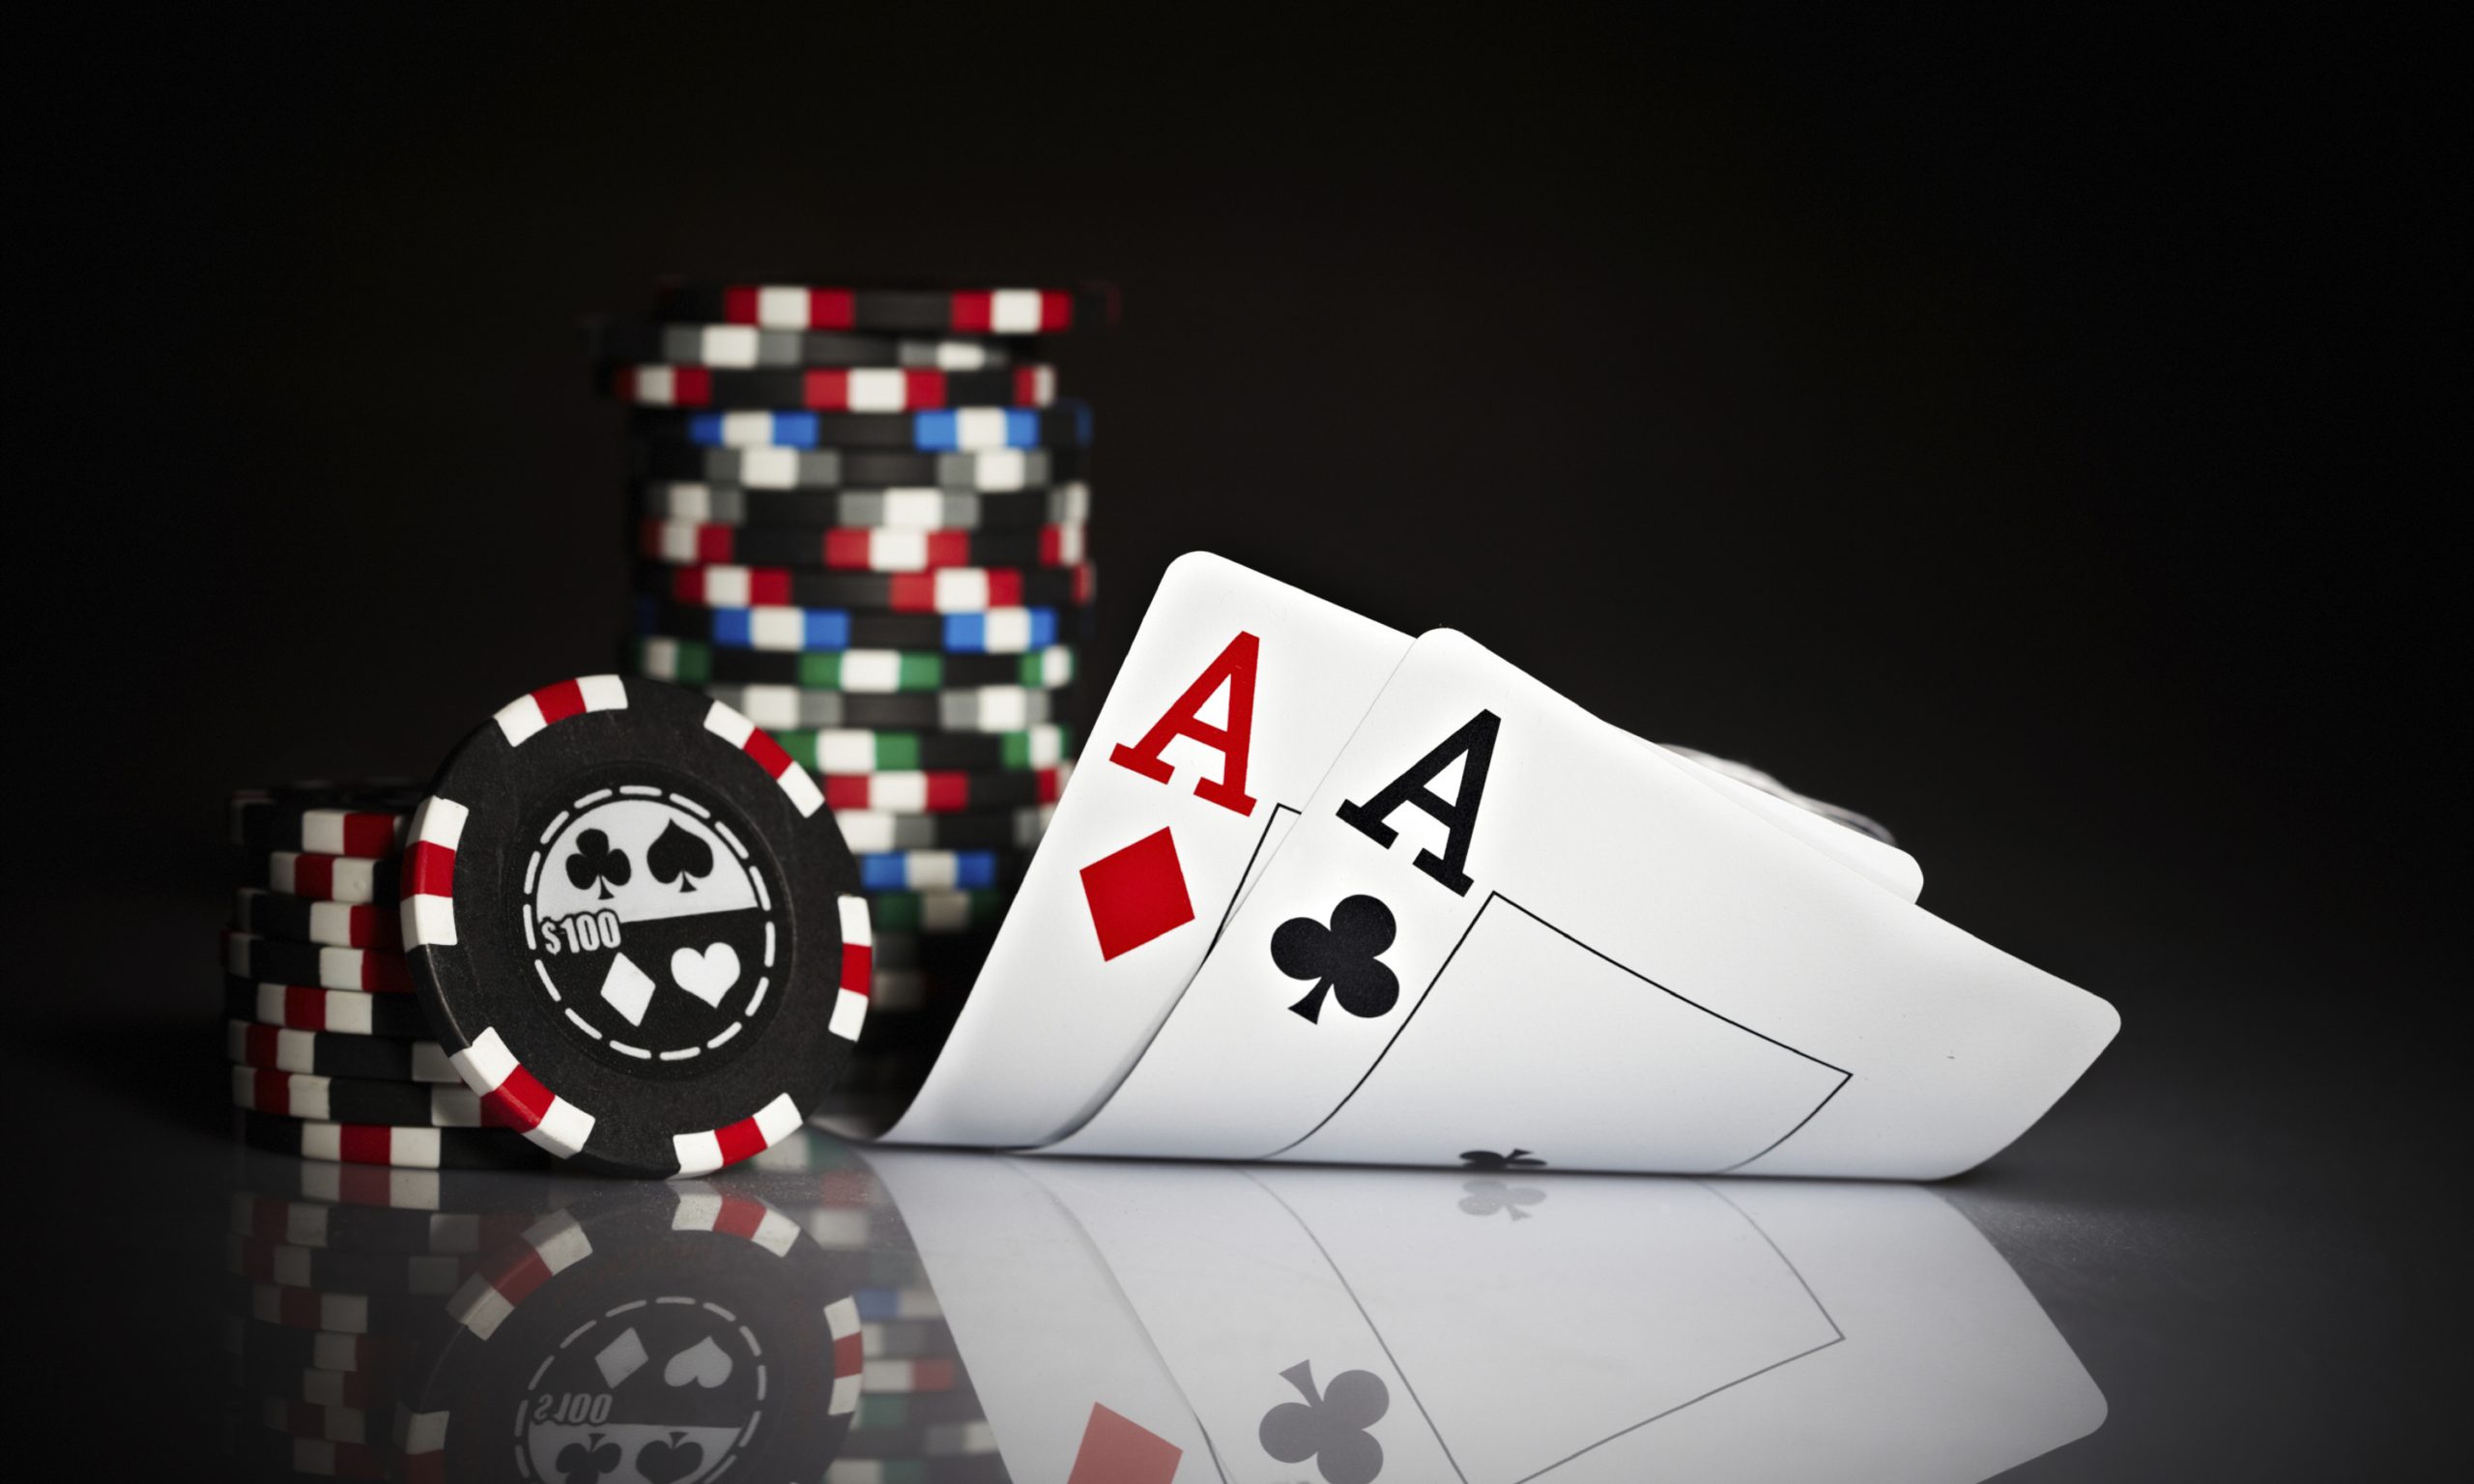 Play live casino games